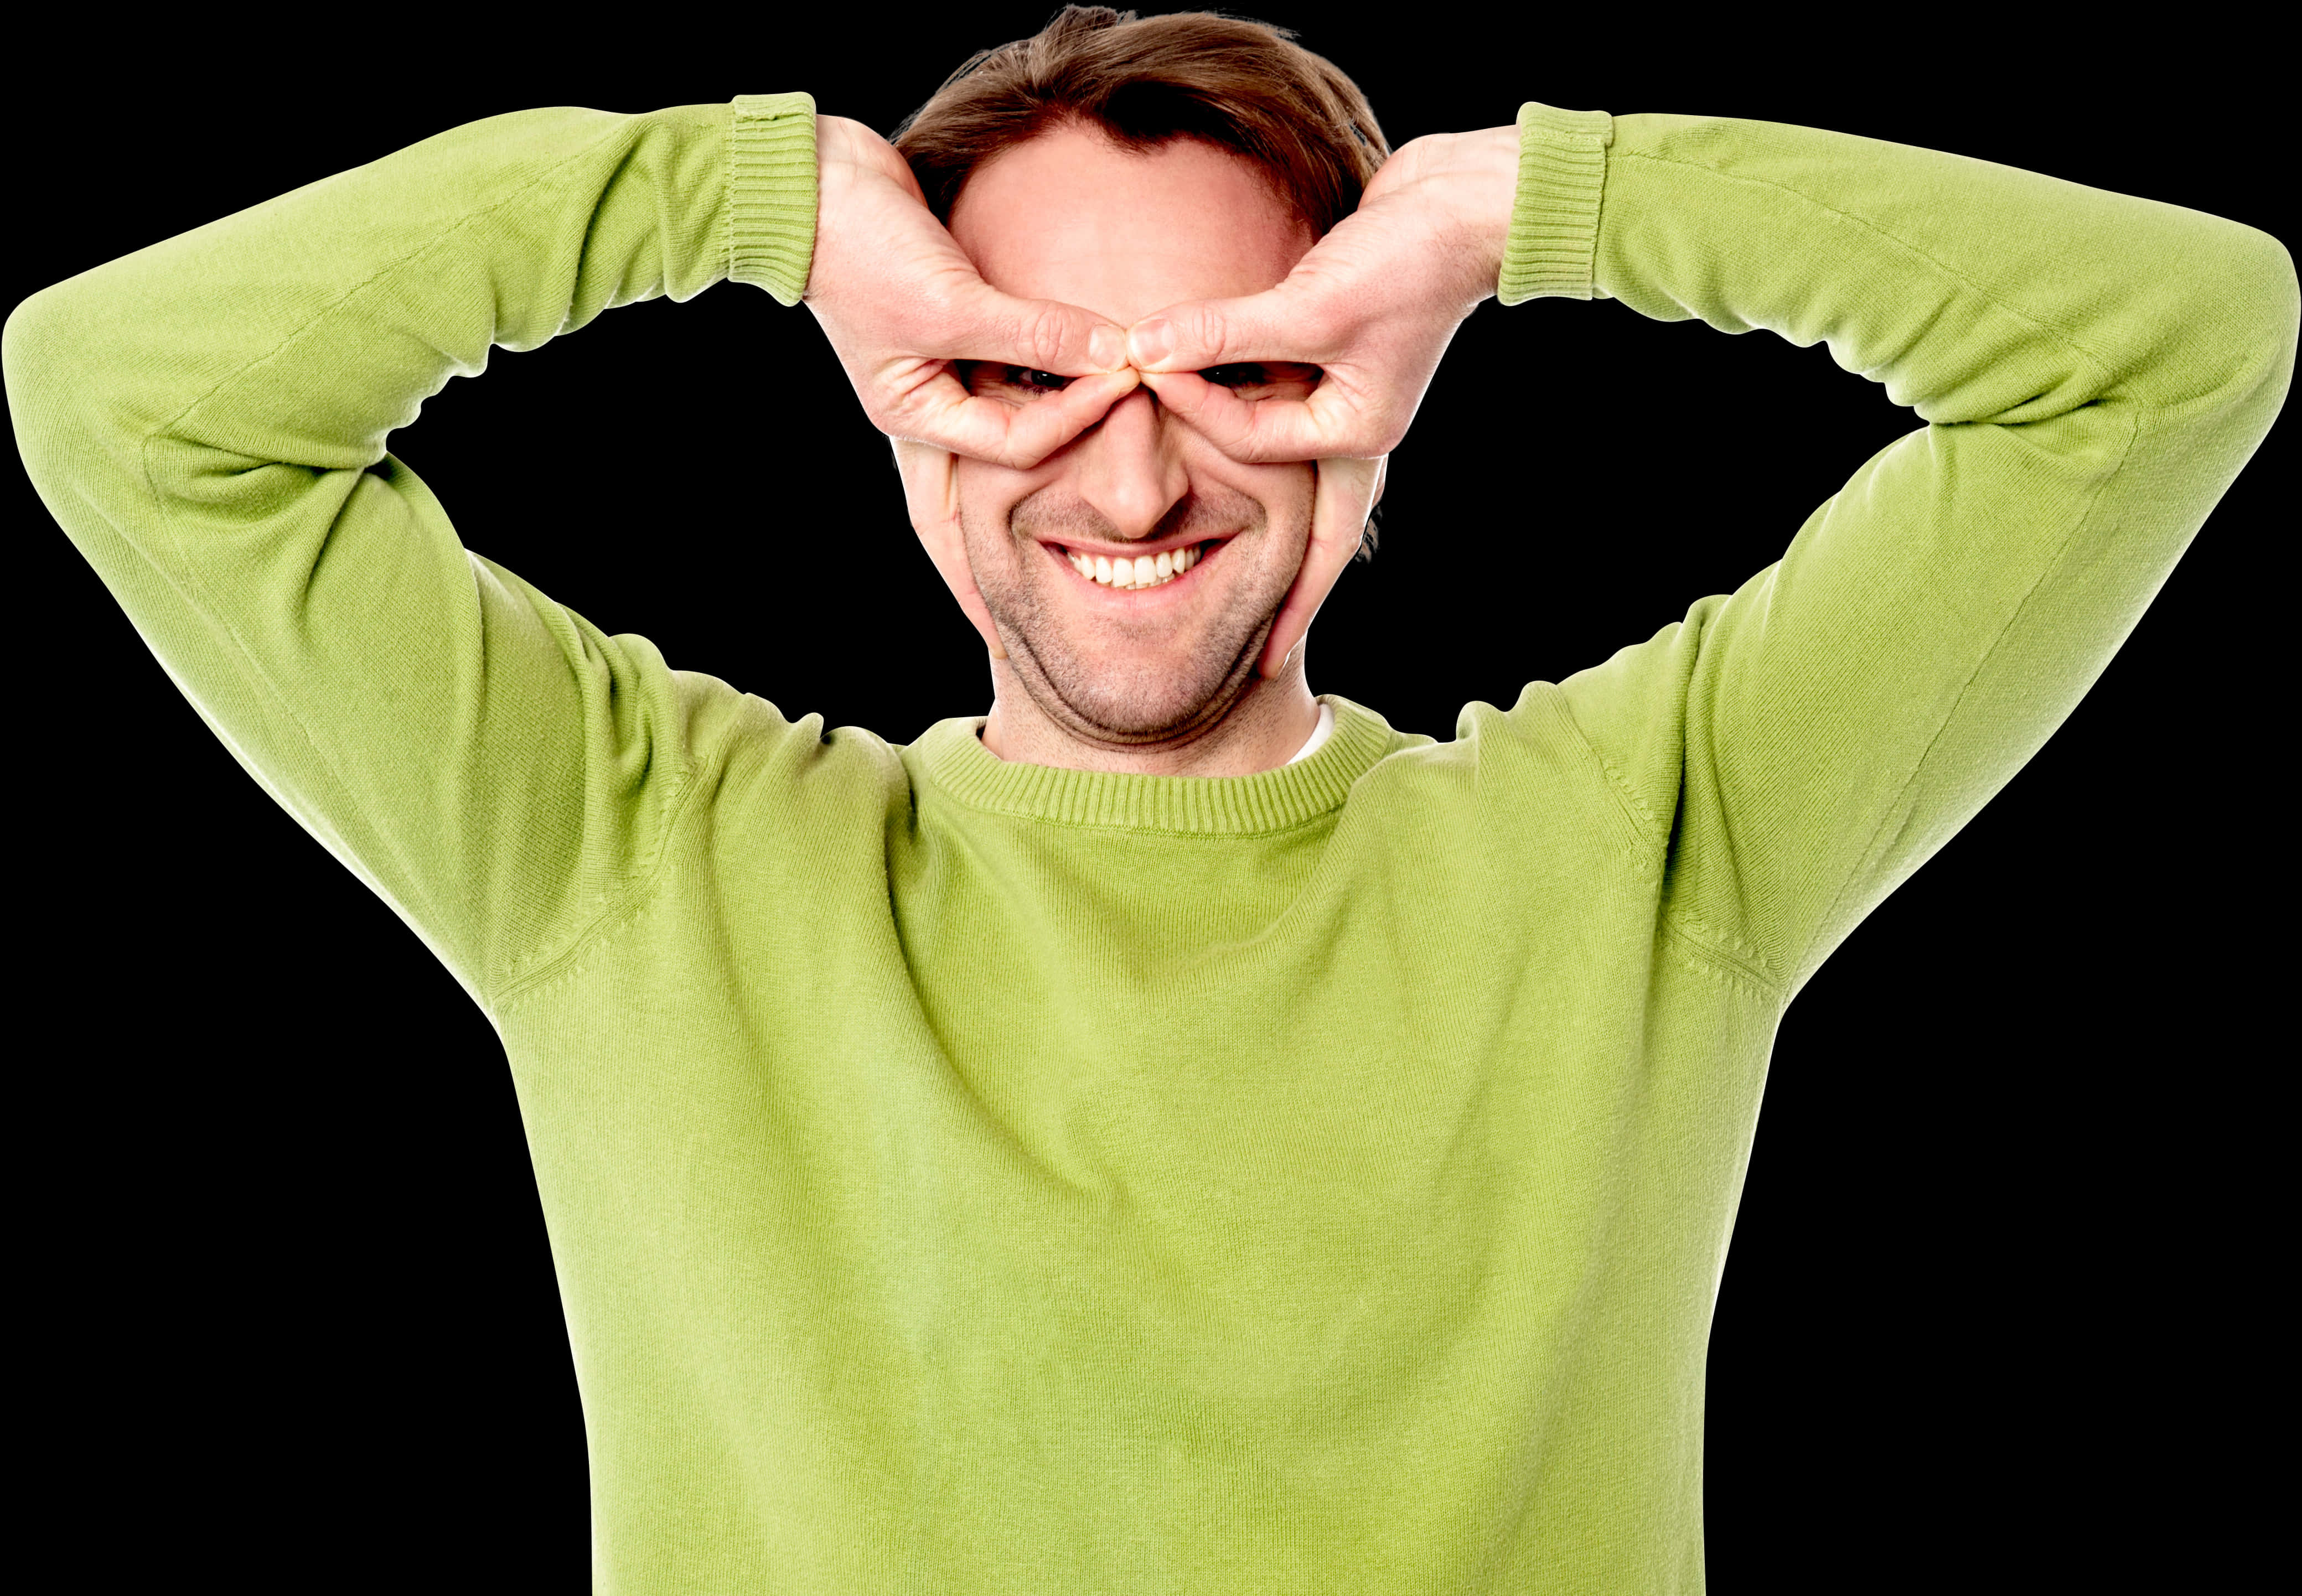 Playful Goggles Gesture Man Green Sweater